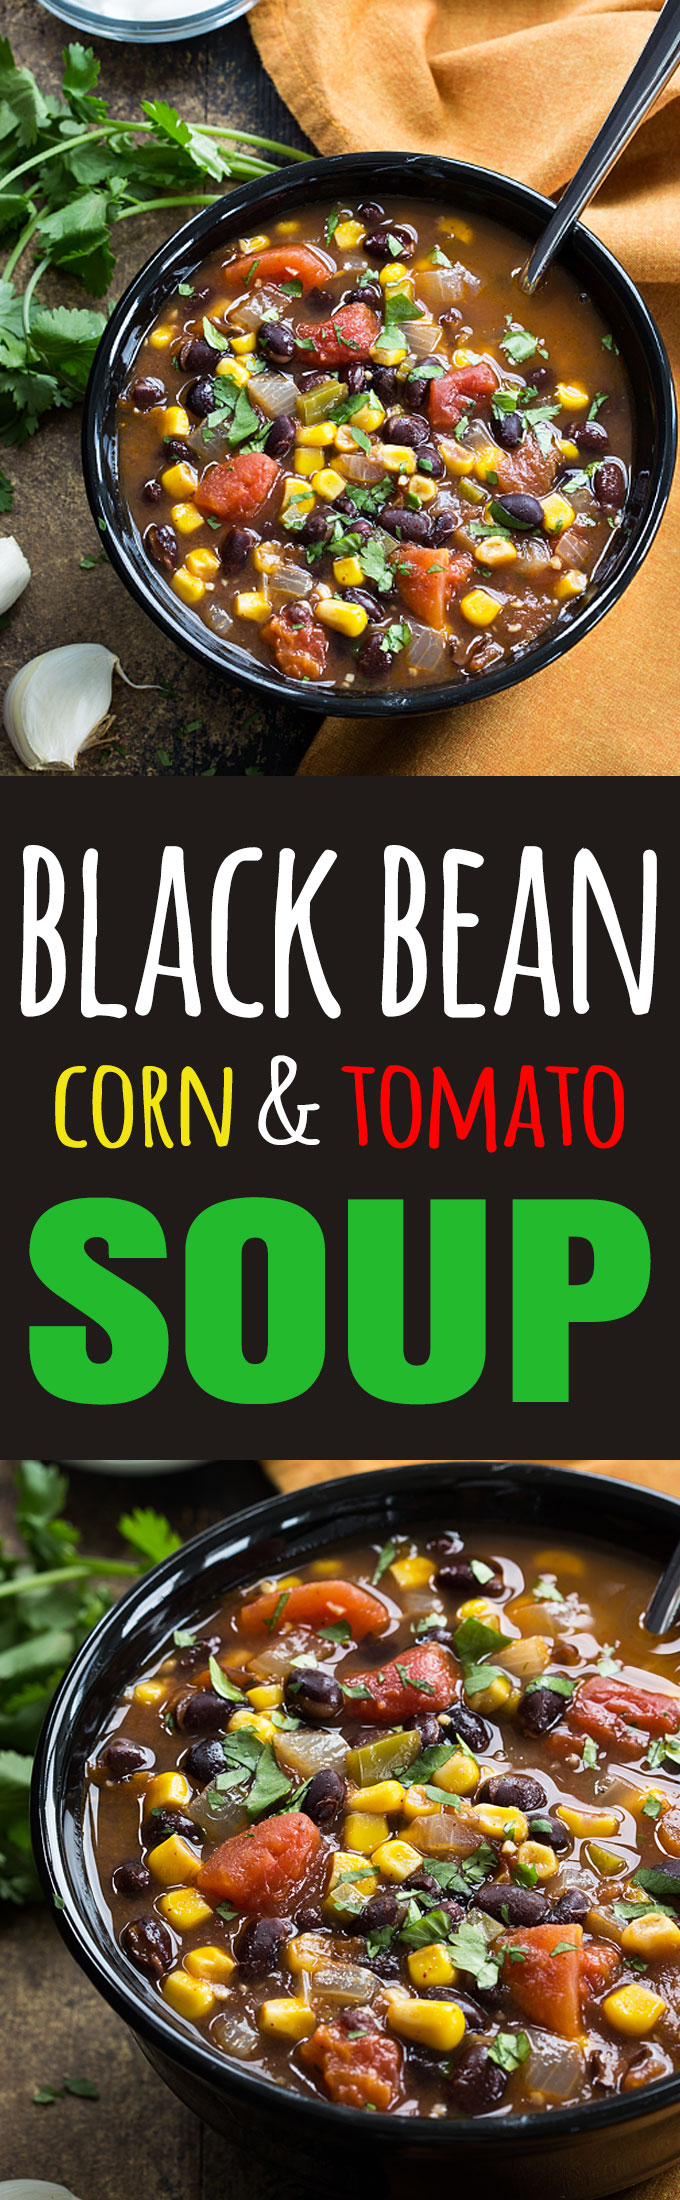 A two image vertical collage of black bean corn and tomato soup with overlay text in the center.